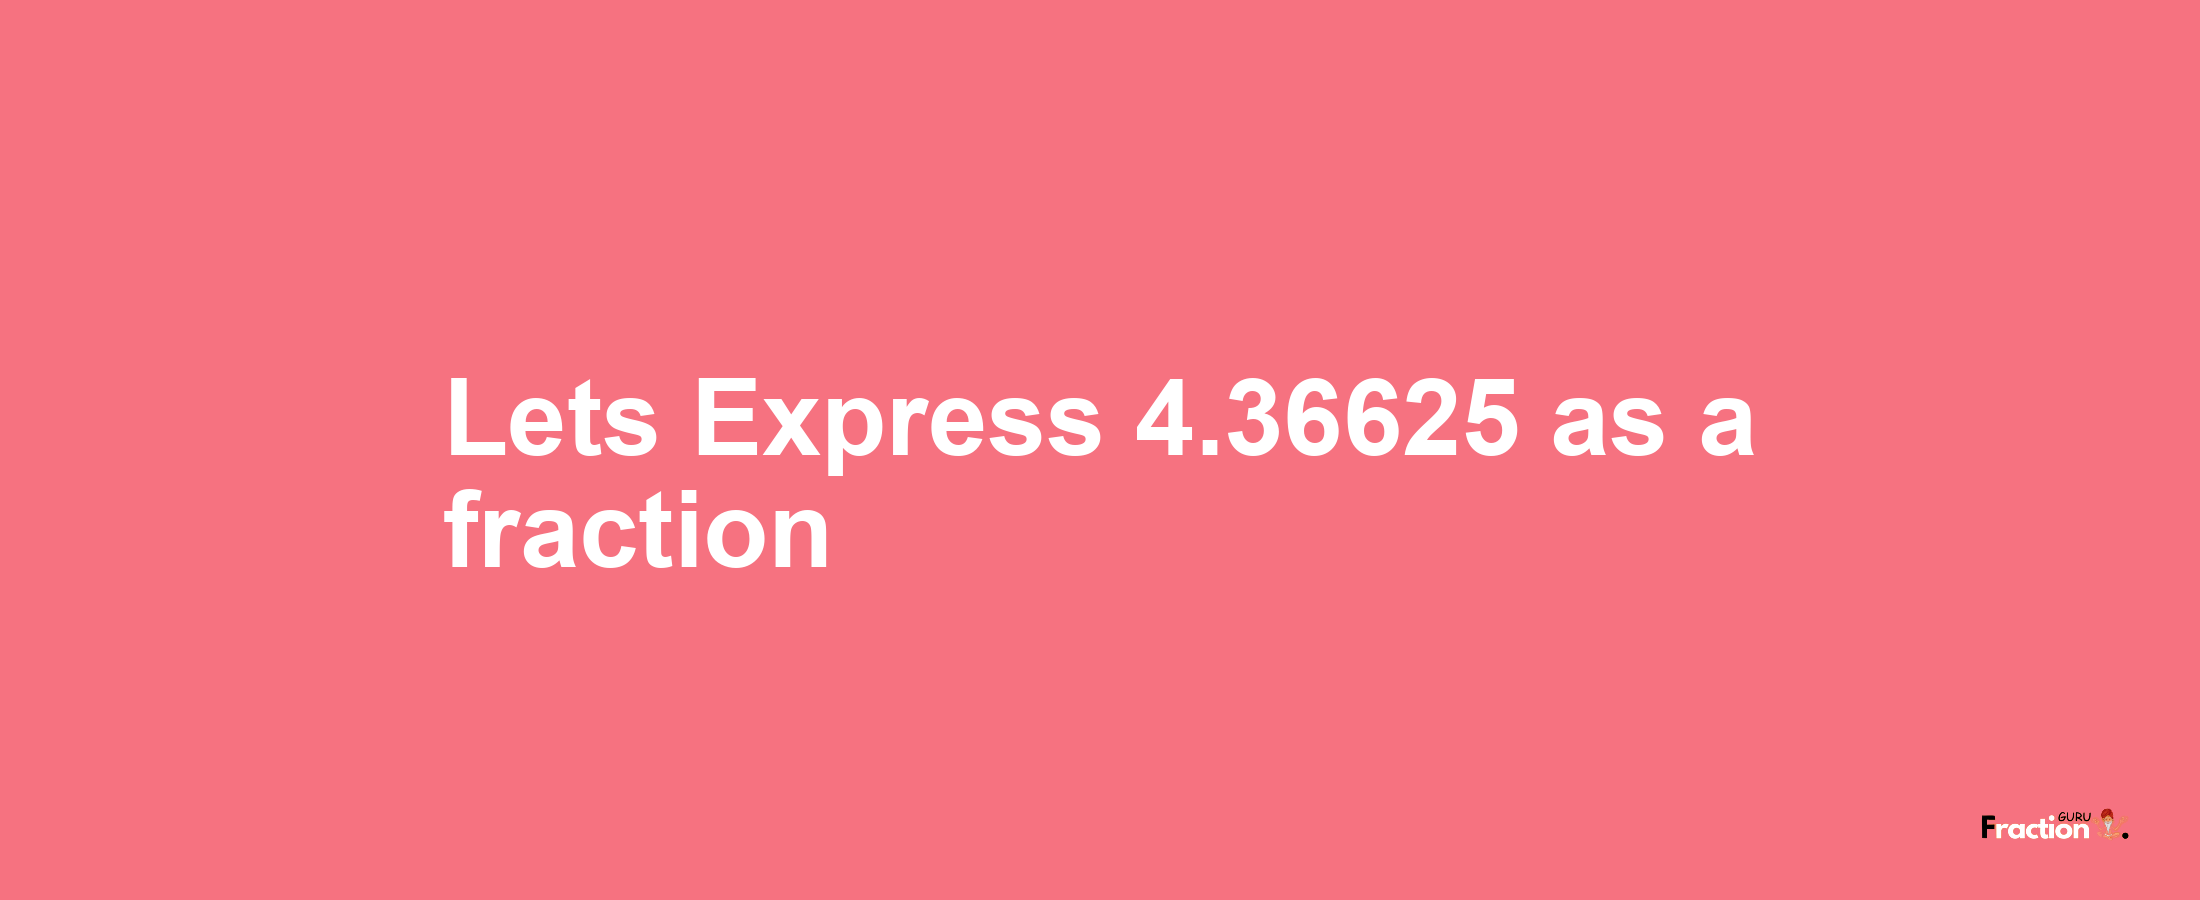 Lets Express 4.36625 as afraction